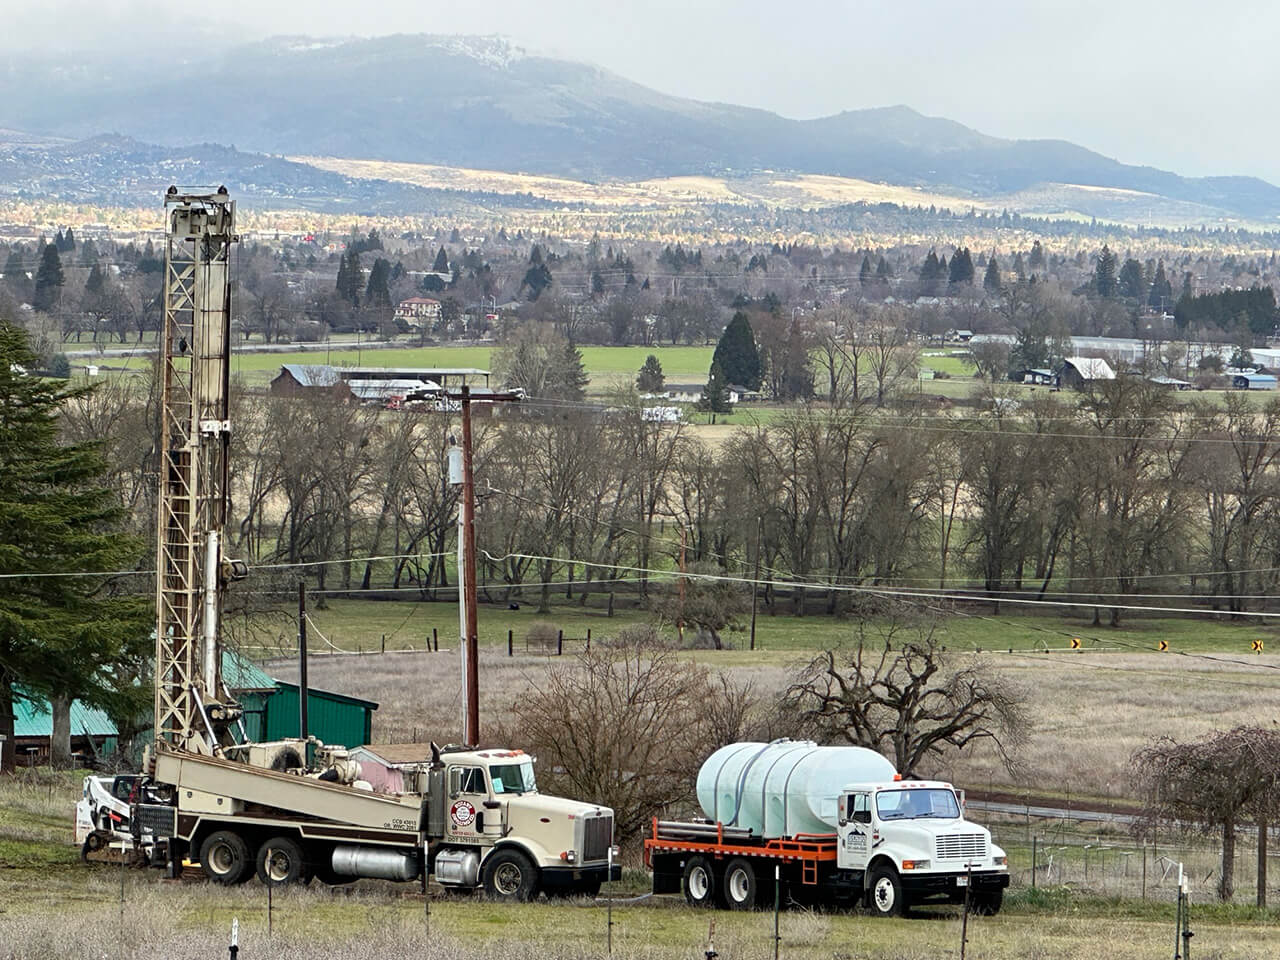 A photo showing the Siskiyou mountains in the background and 2 water well drilling trucks and rig in the foreground